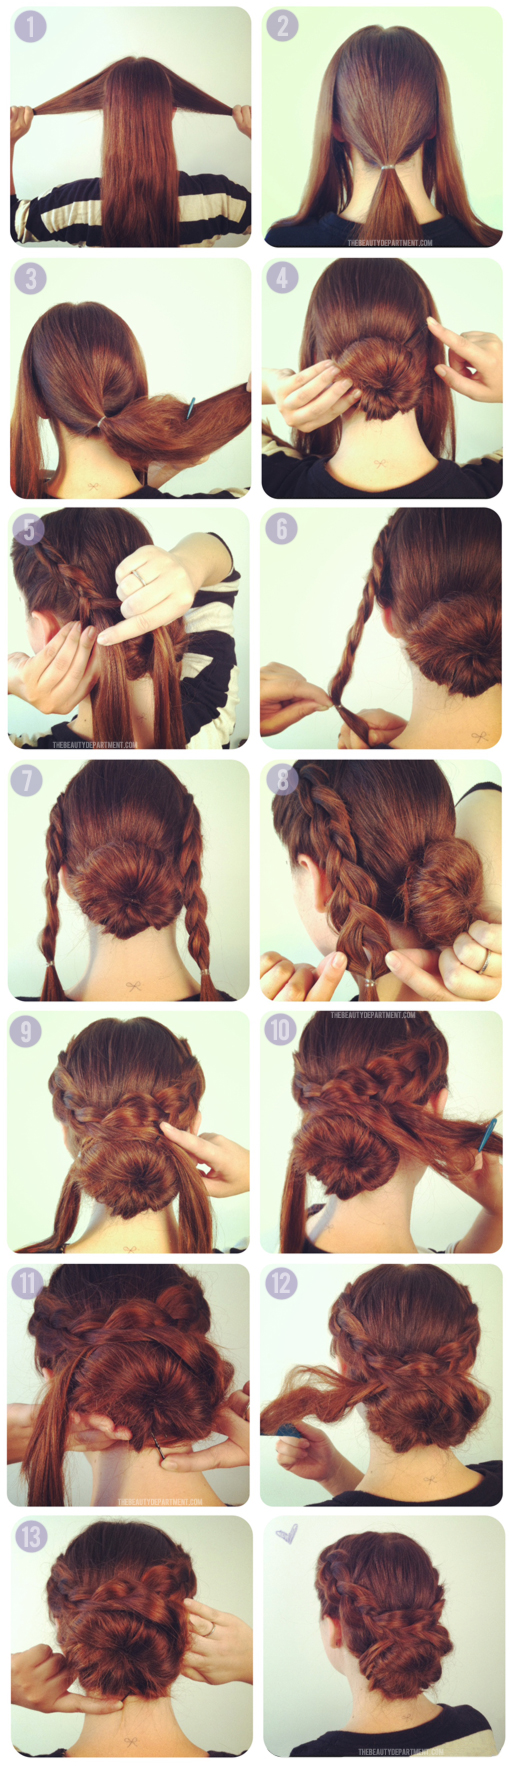 hairstyle6